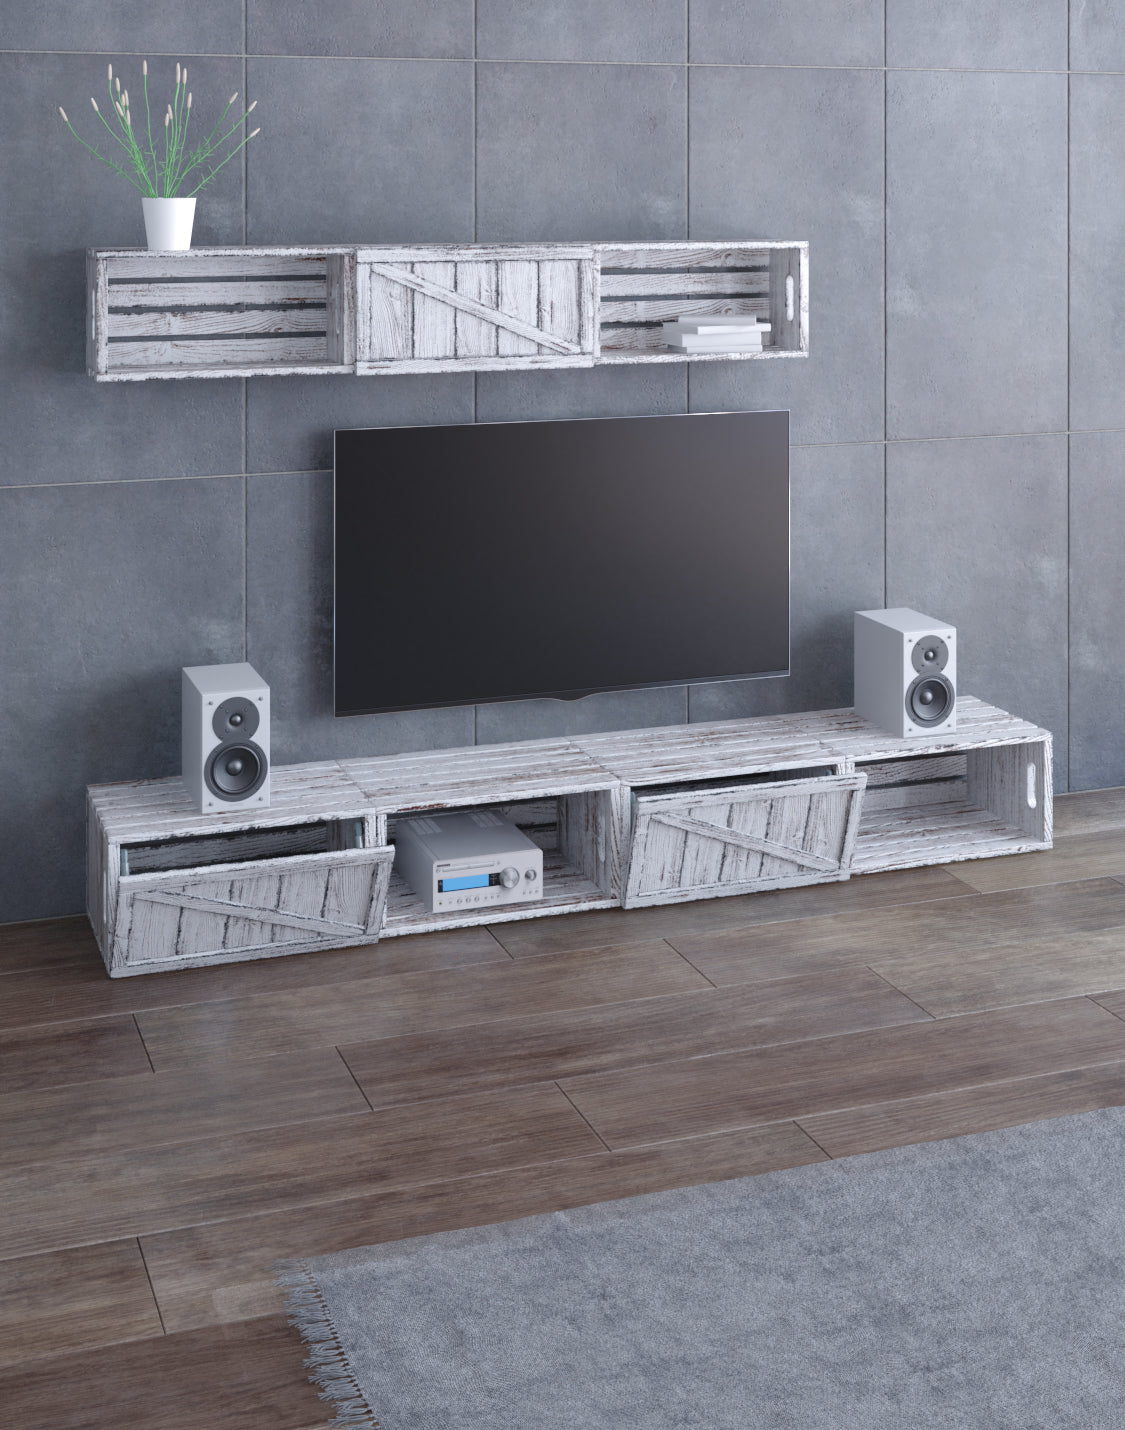 Smith TV Unit Modular And real wood furniture product